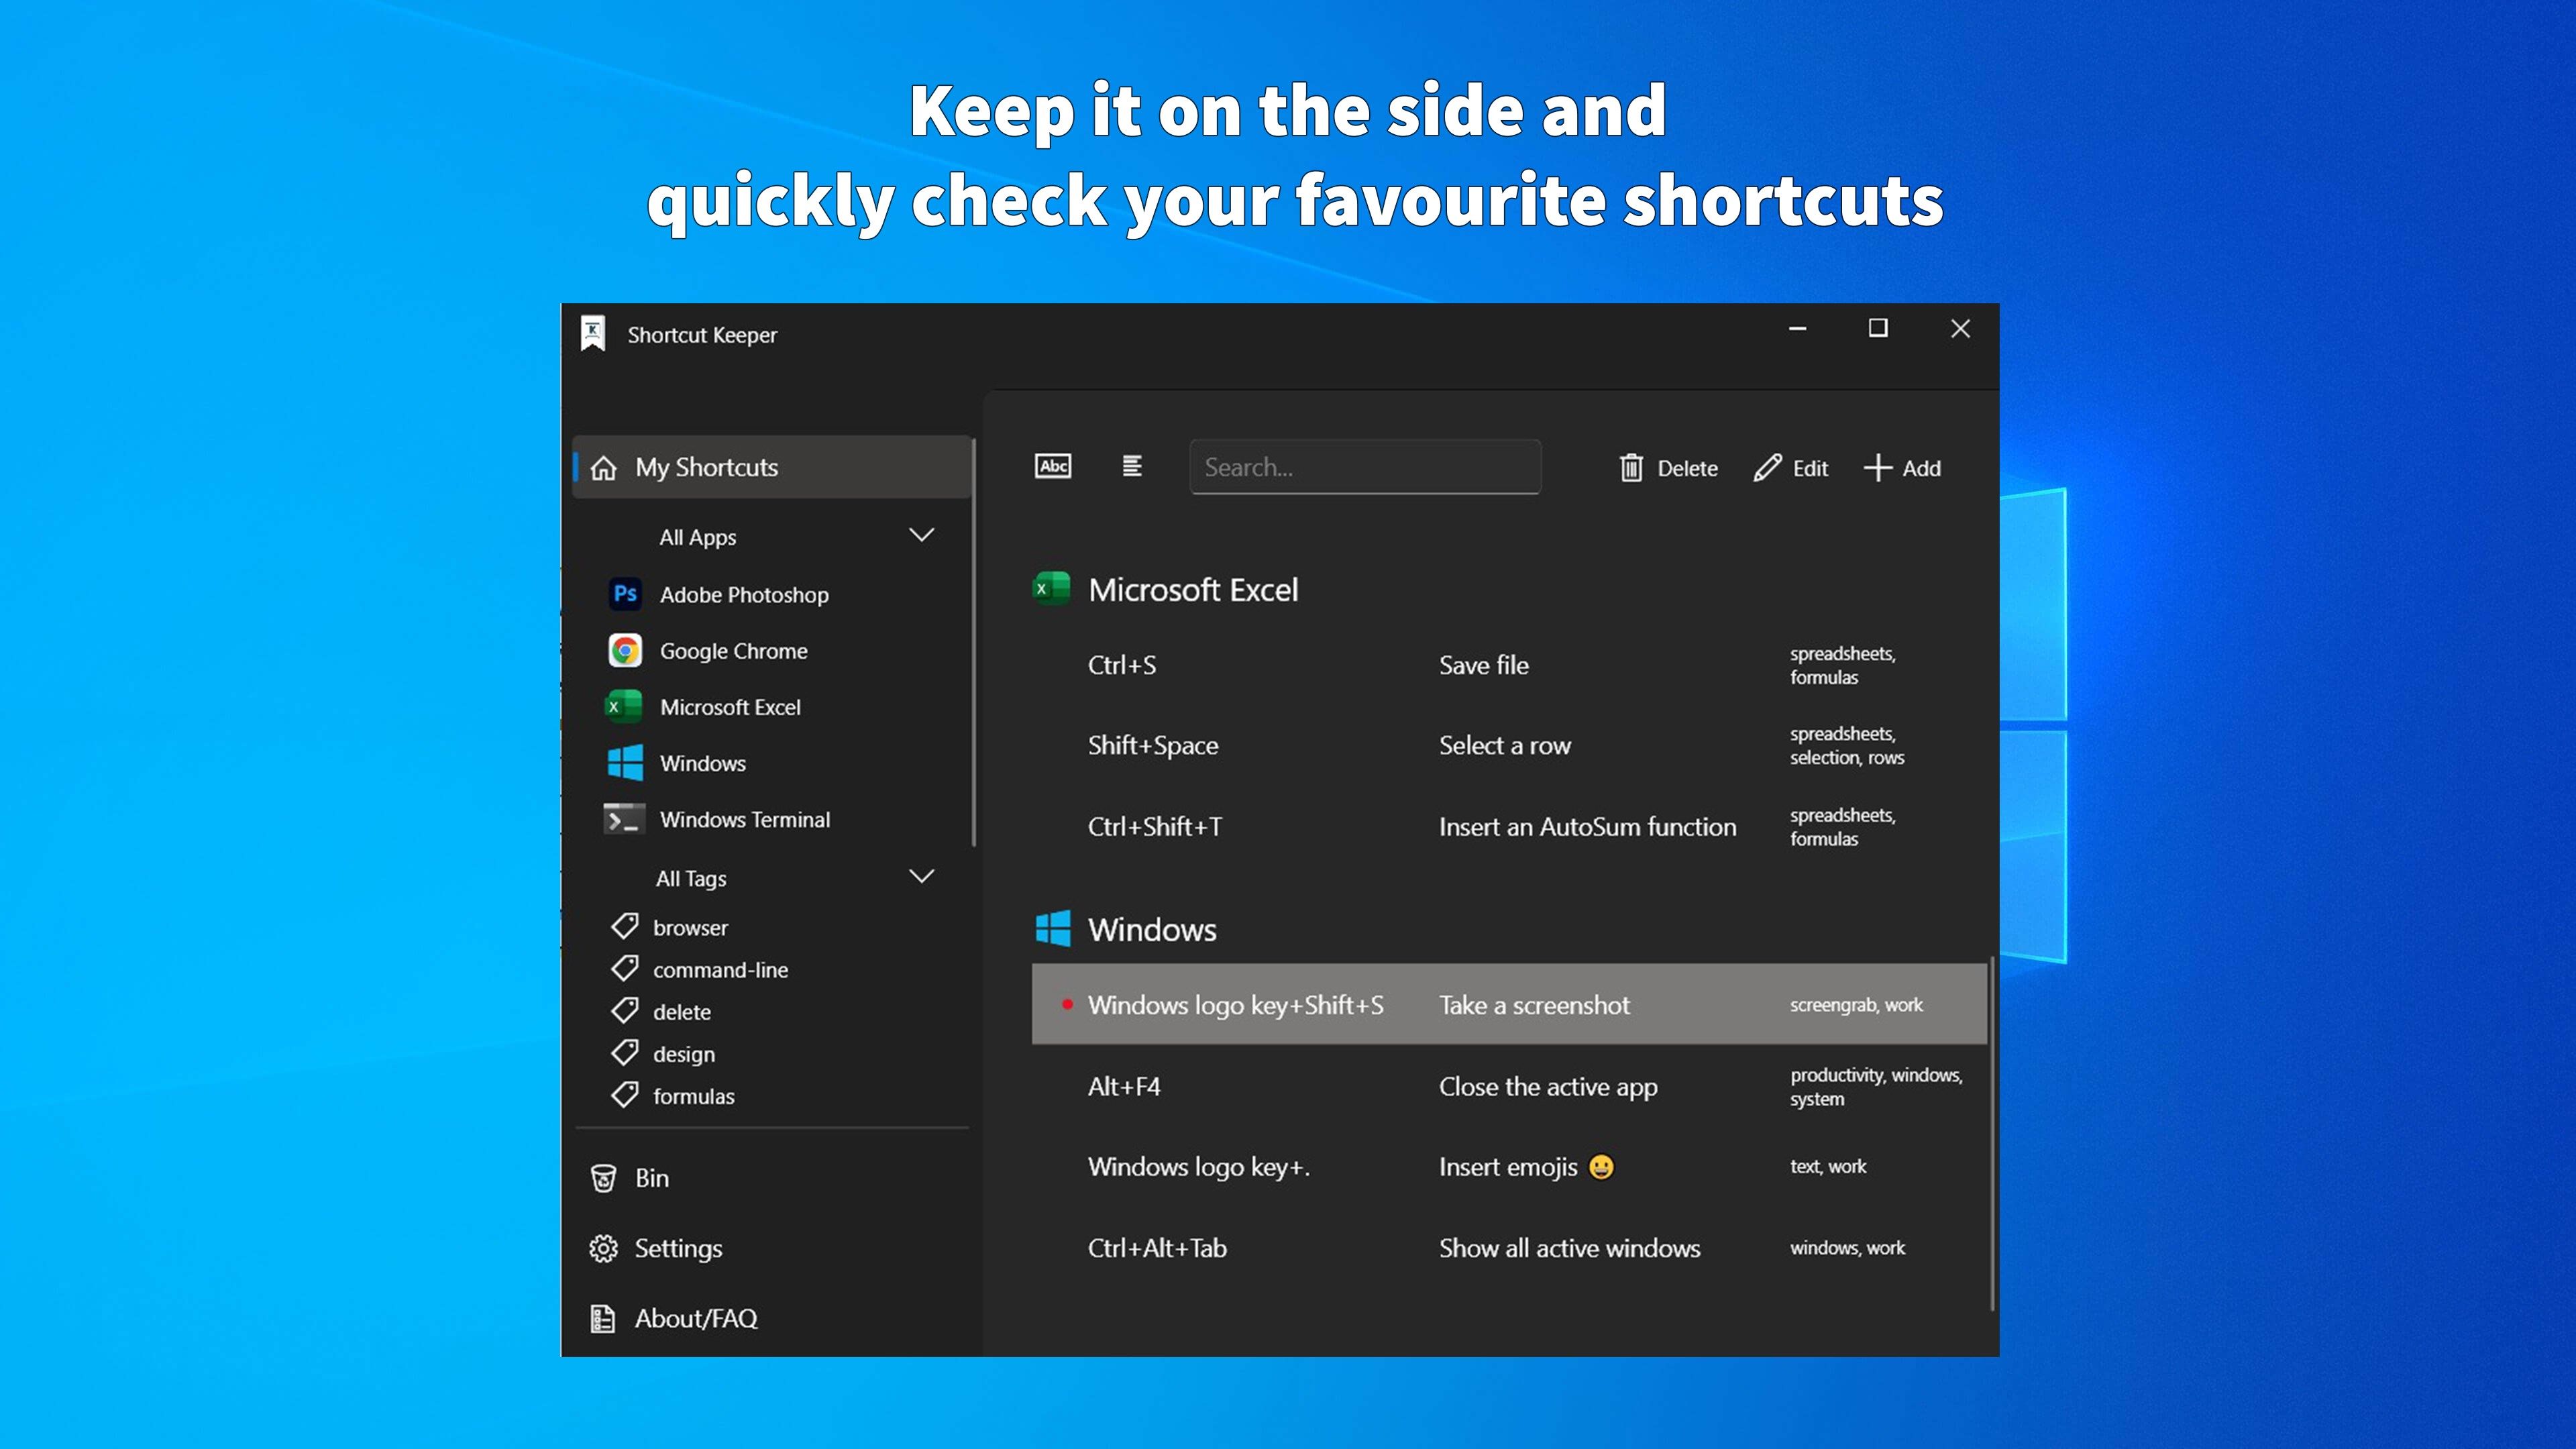 Keep it on the side and quickly check your favorite shortcuts